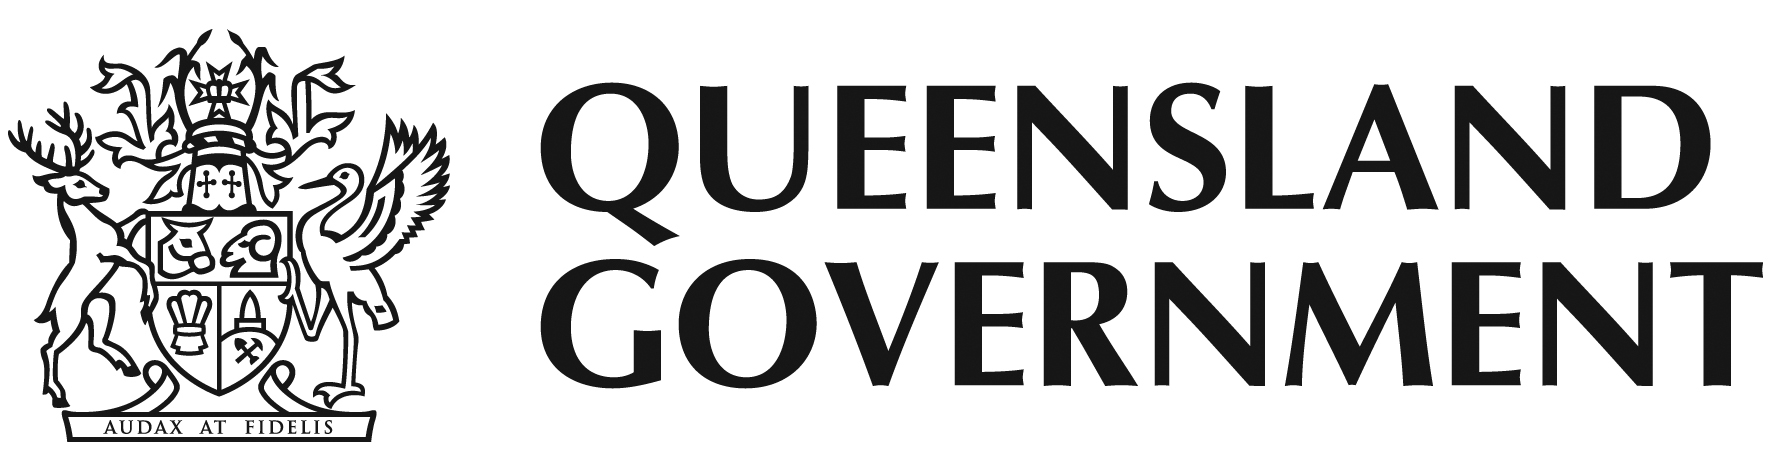 Image result for queensland government